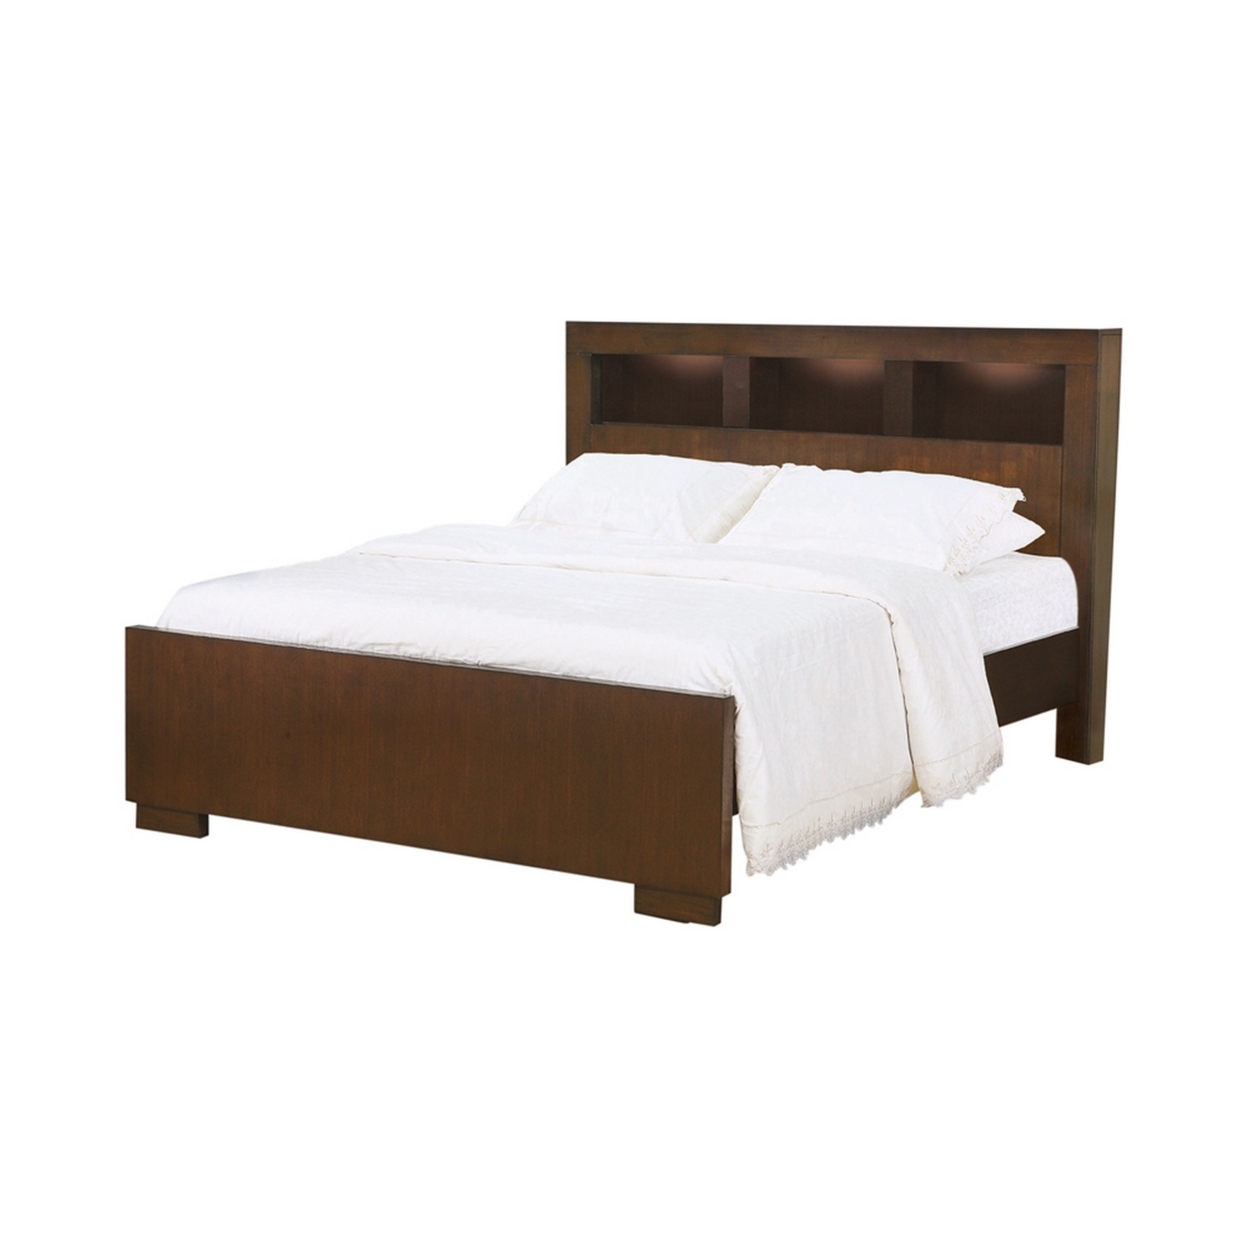 3 Open Bookcase Eastern King Size Bed With Soft Light, Brown- Saltoro Sherpi